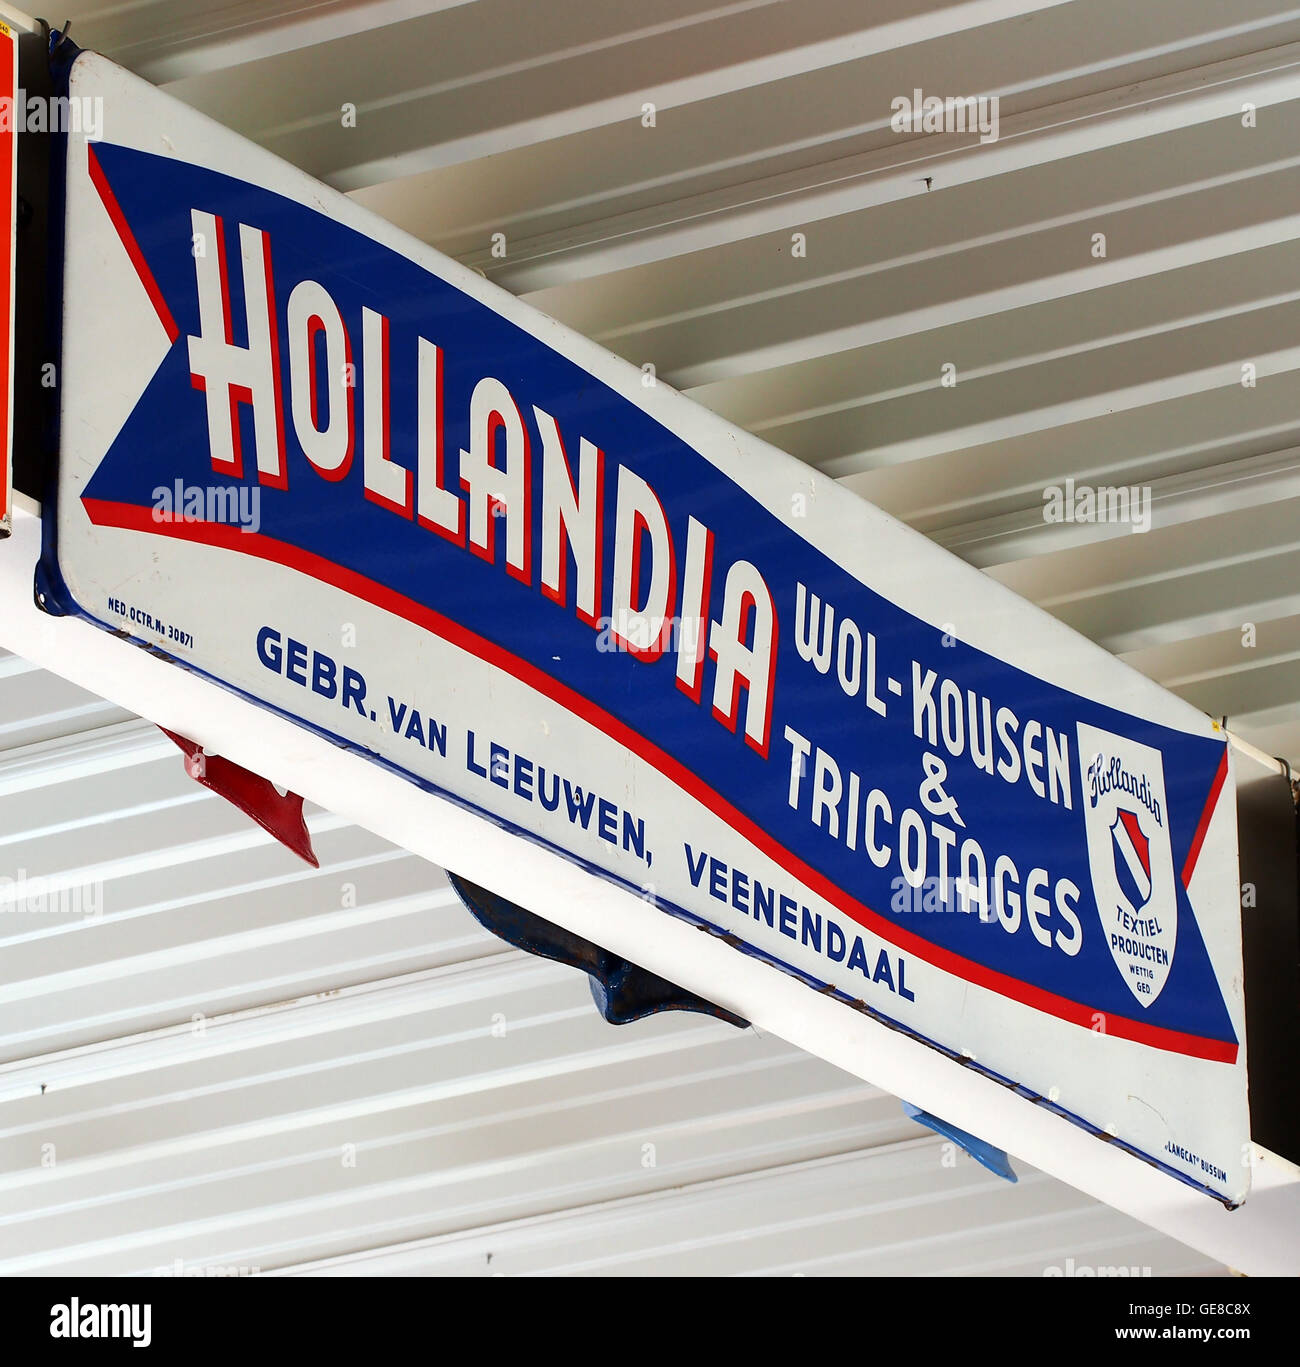 Hollandia, wol-kousen & tricotages, Emaille reclamebord Foto Stock